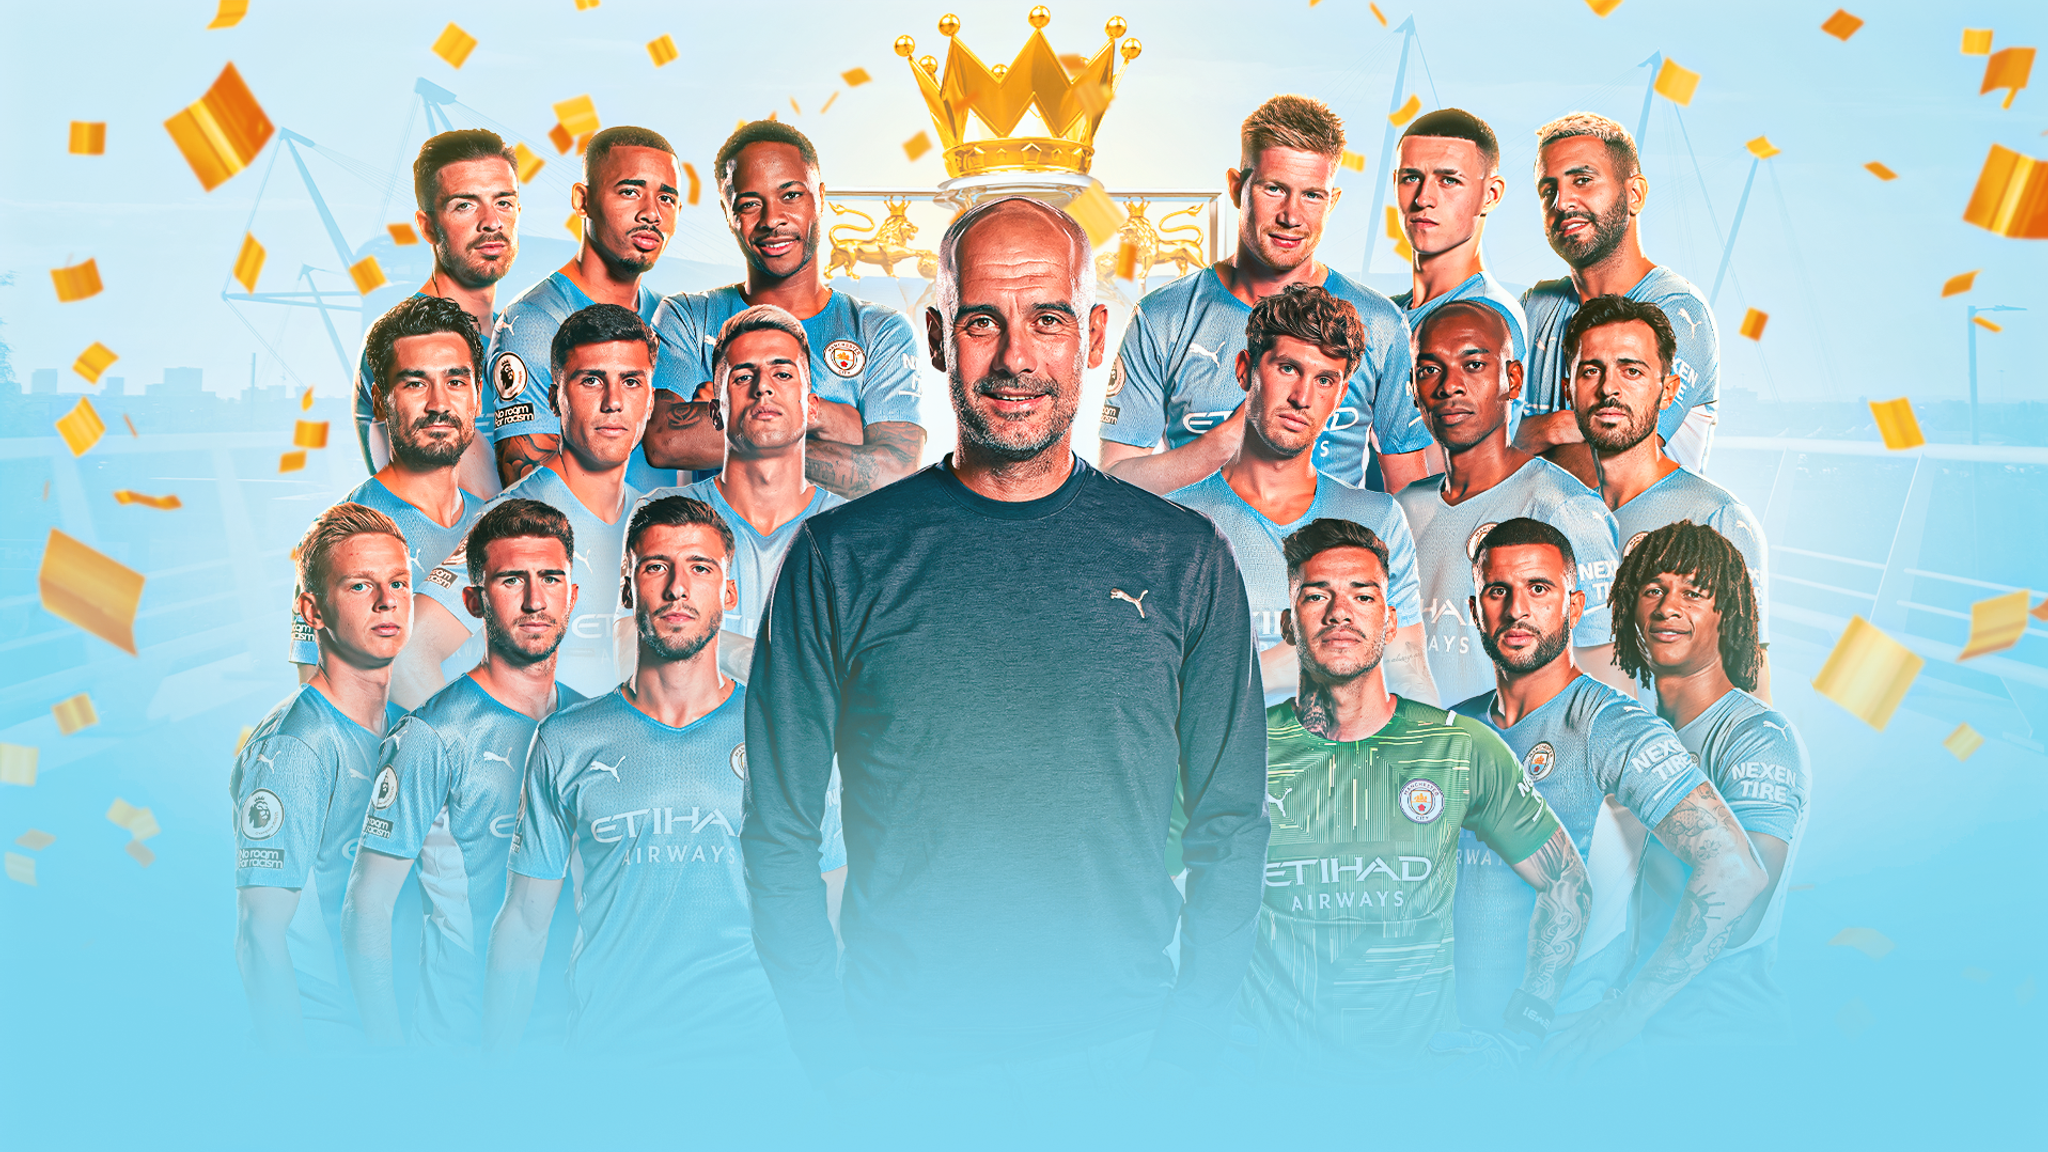 Man City crowned 2021/22 Premier League champions after pipping Liverpool on stunning final day | Football News | Sky Sports